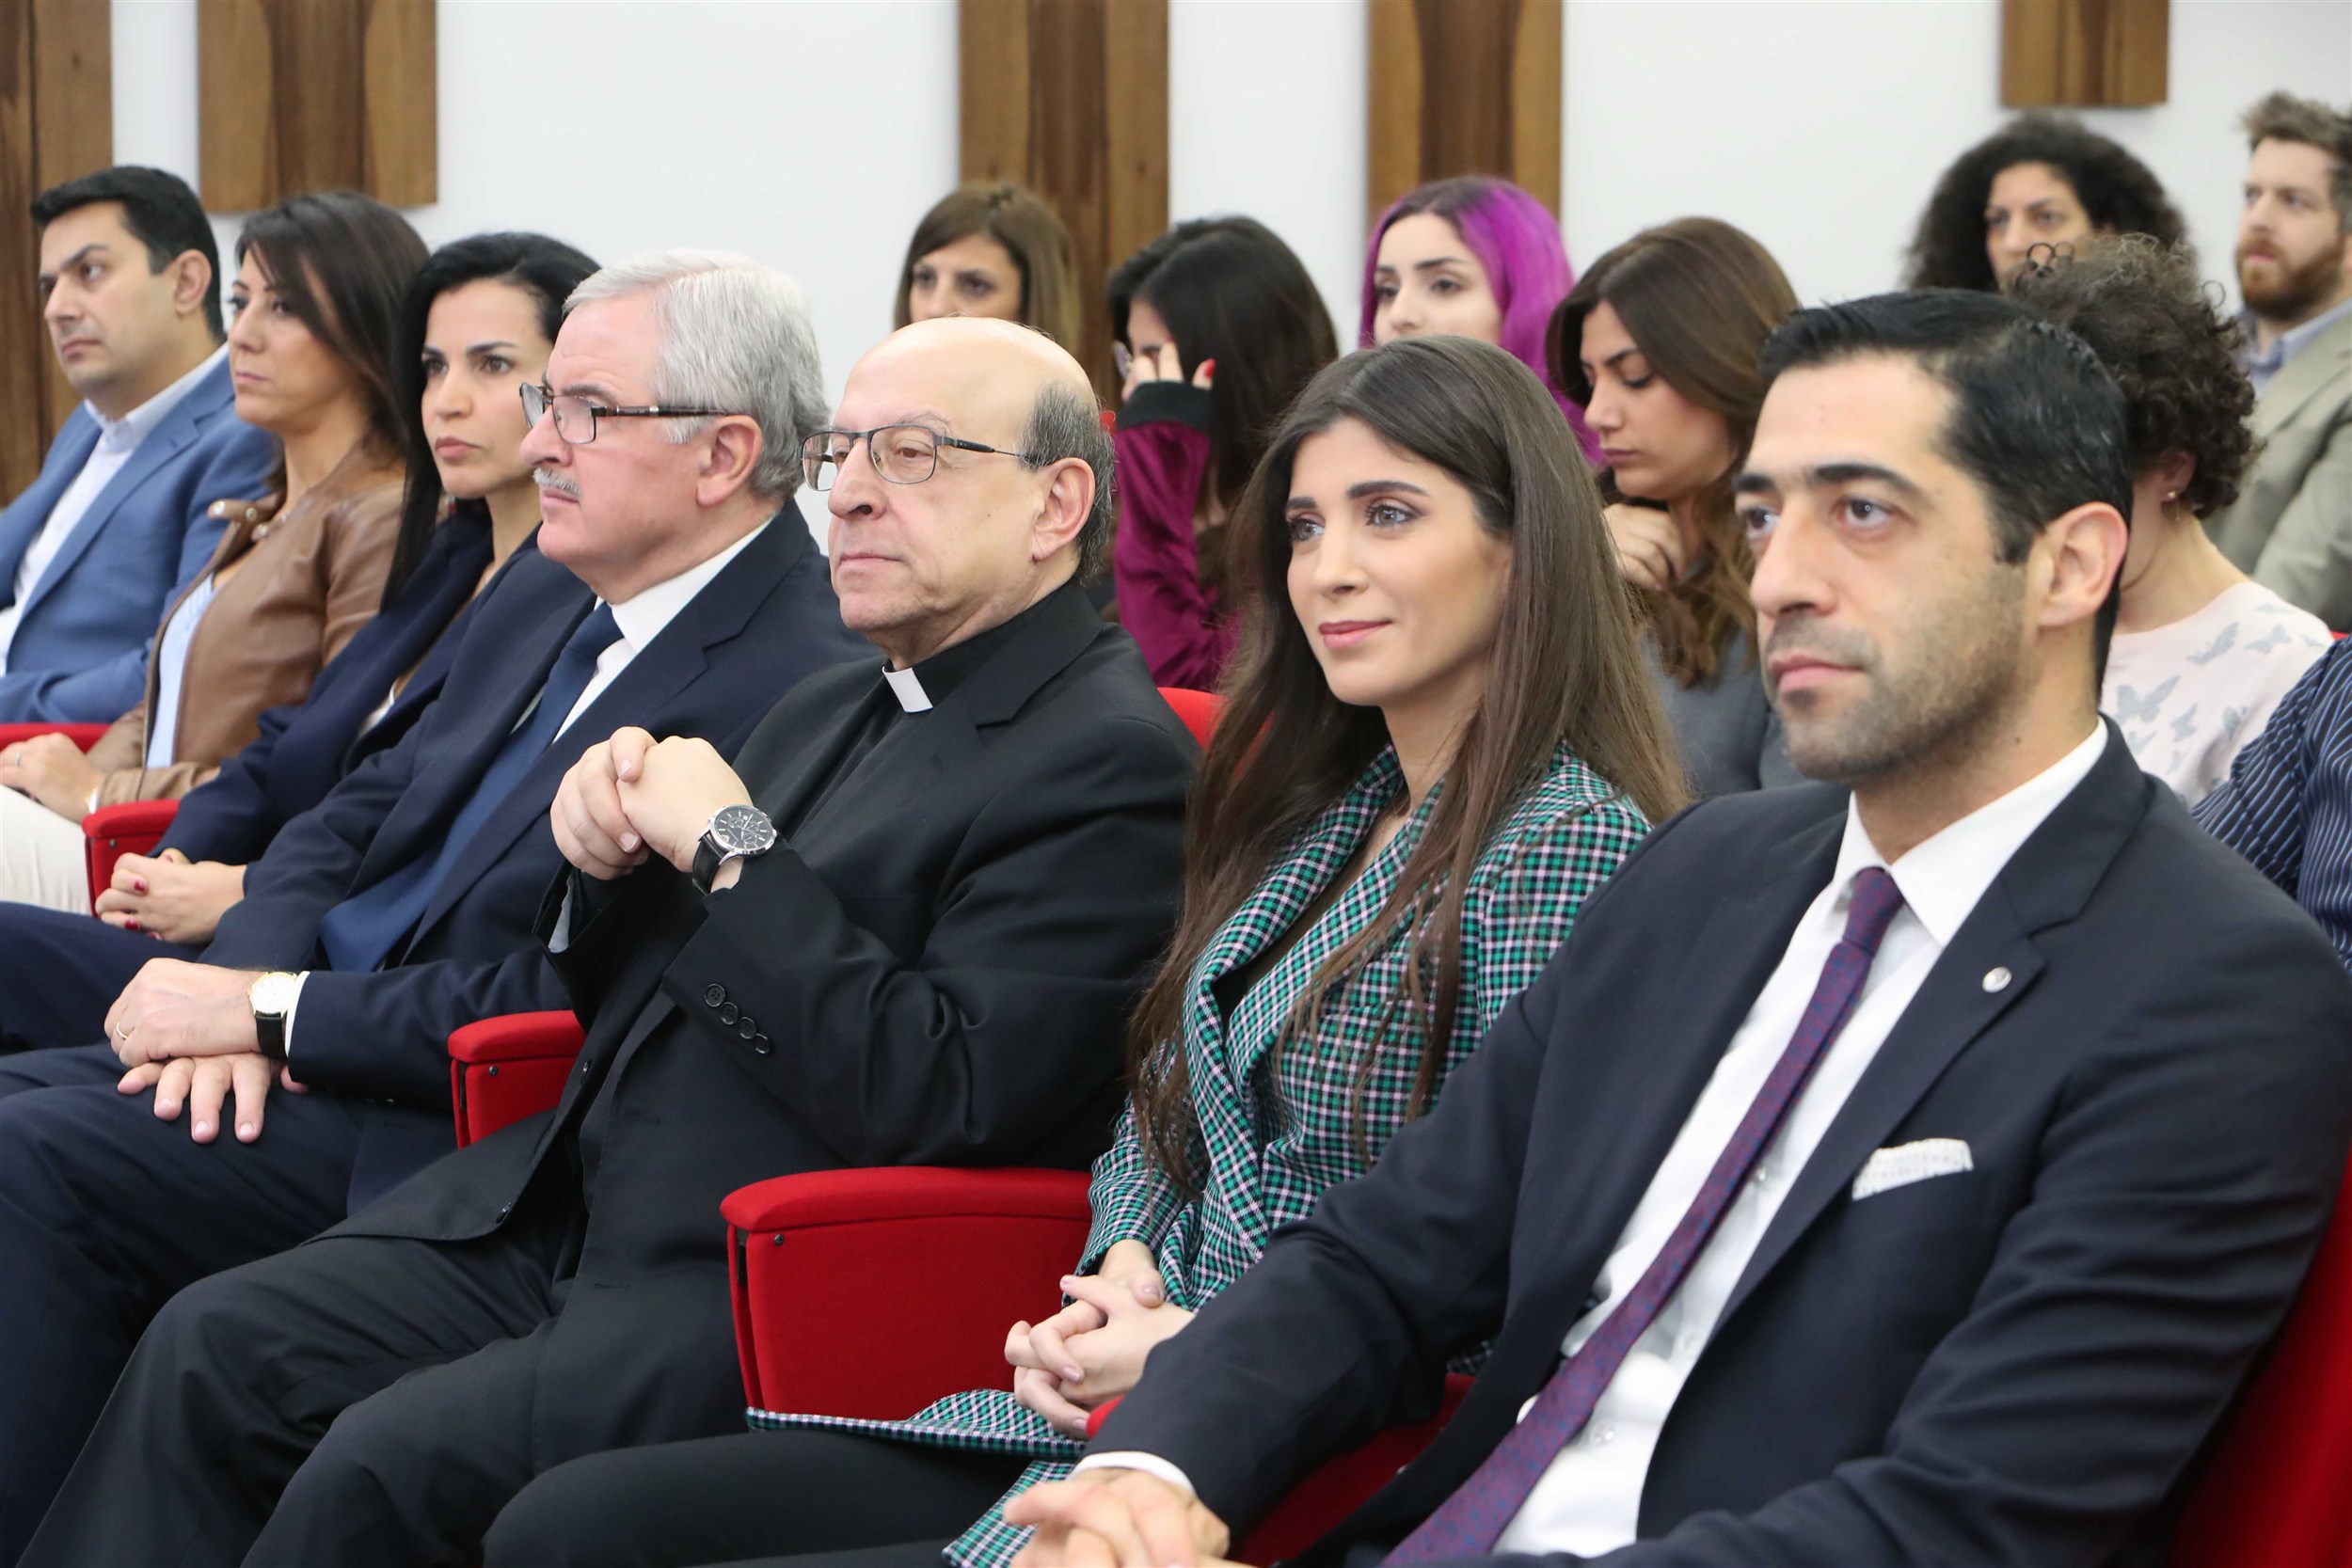 president of usek father professor georges hobeika  and the members of the jury, which include mrs inas al jarmakani, minister jean oghassapian, member of parliament elias hankash,  mr elias abou fadel, and head of the department of science and technology  dr. barbar zeghondi.